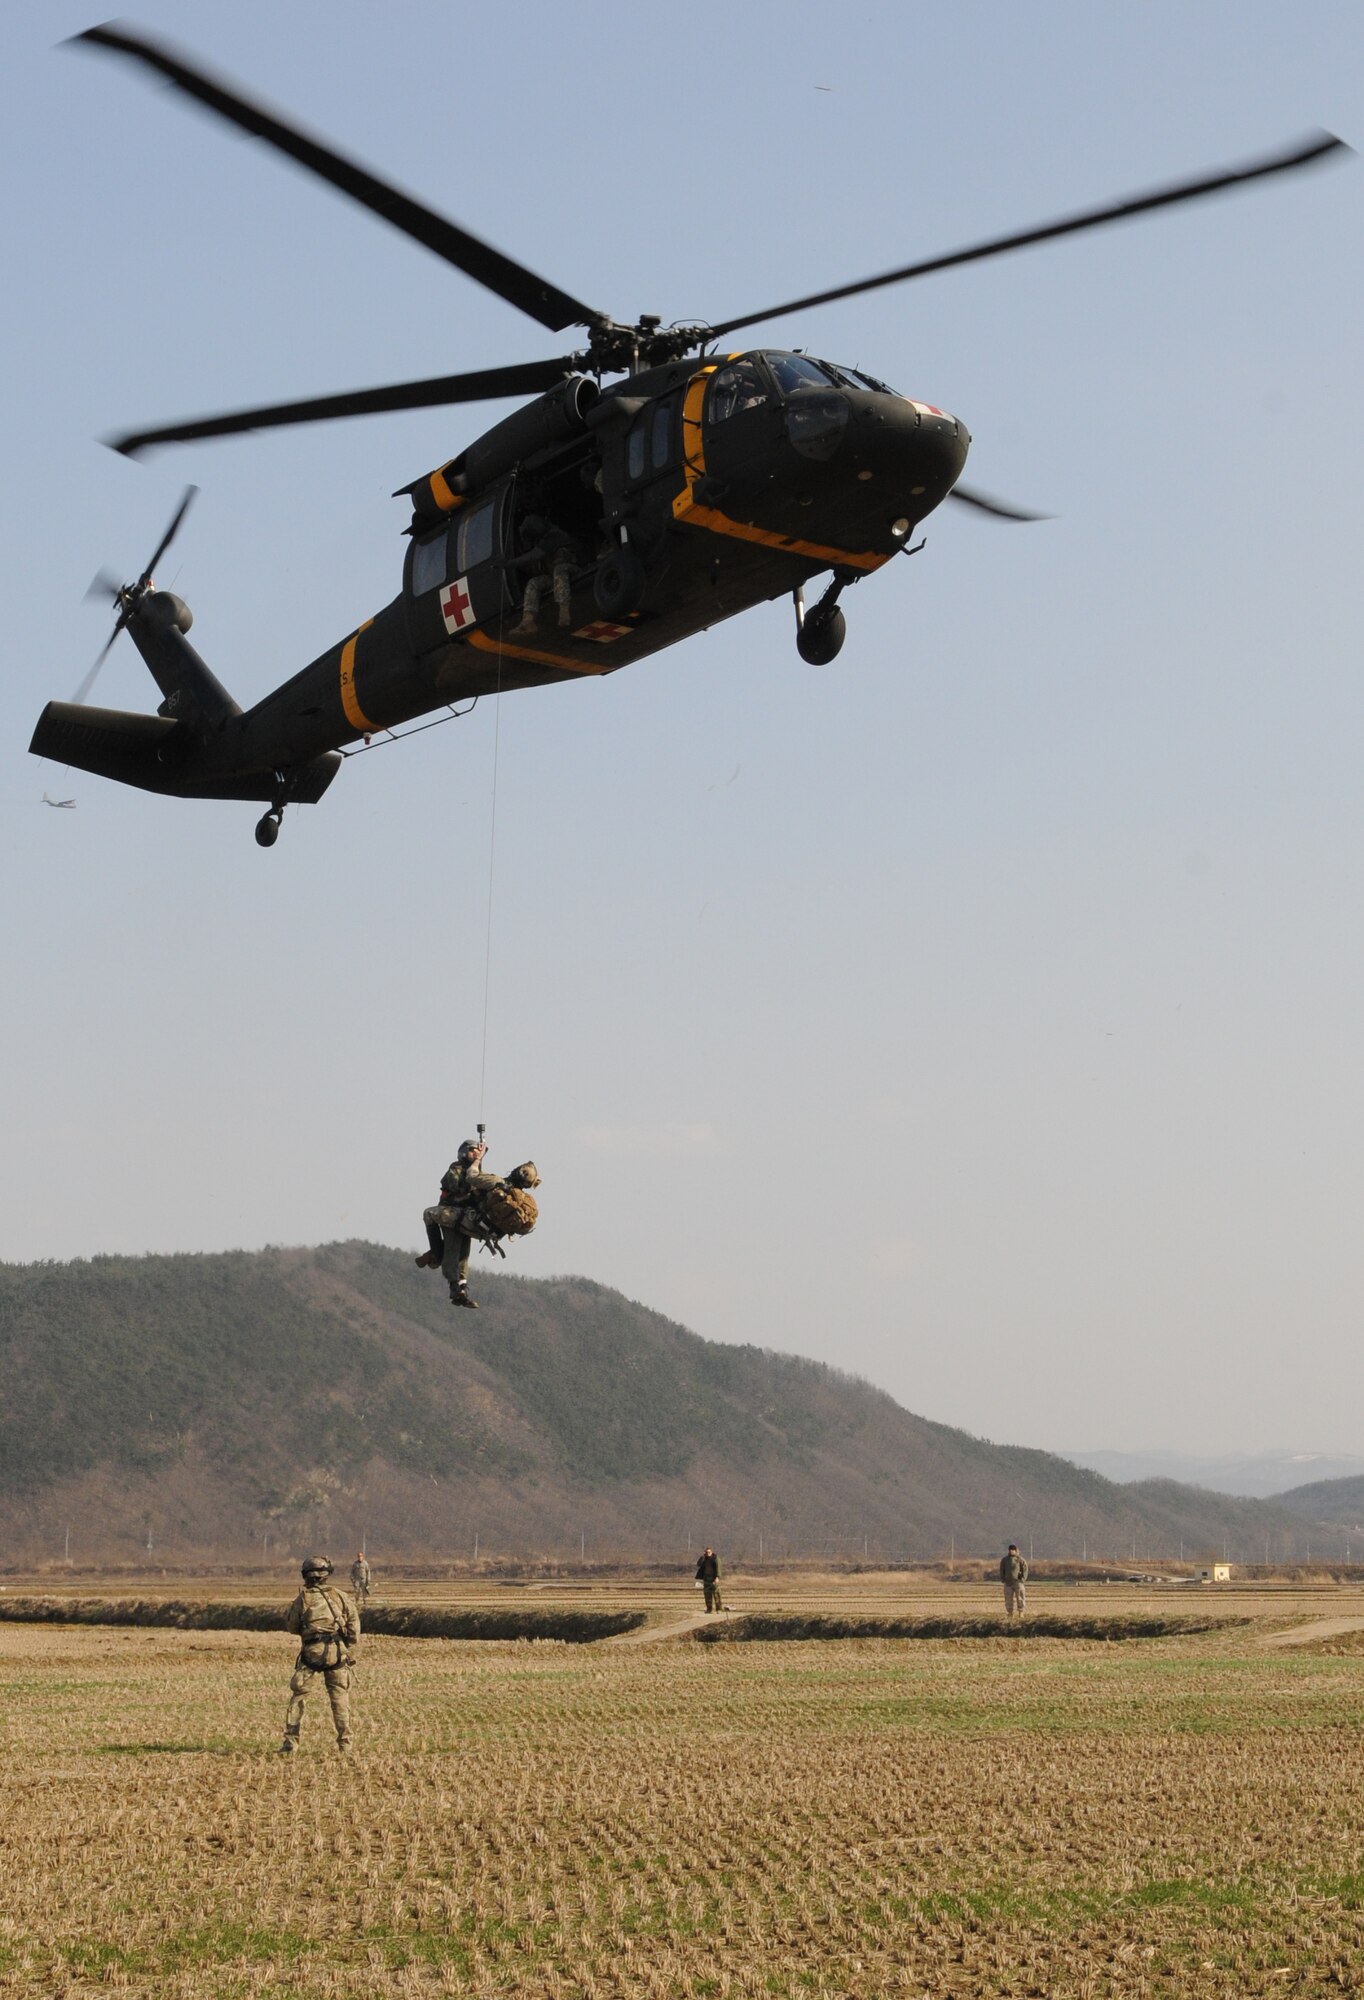 NEAR AN’GANG, Republic of Korea -- A pararescueman from the 320th Special Tactics Squadron and a simulated wounded aircrew member are hoisted into a UH-60 Blackhawk from the 2nd Combat Aviation Brigade from U.S. Army Garrison Humphreys during a combat search and rescue exercise here March 26. The scenario is part of the 353rd Special Operations Group’s annual operational readiness exercise. (U.S. Air Force photo by Tech. Sgt. Aaron Cram)